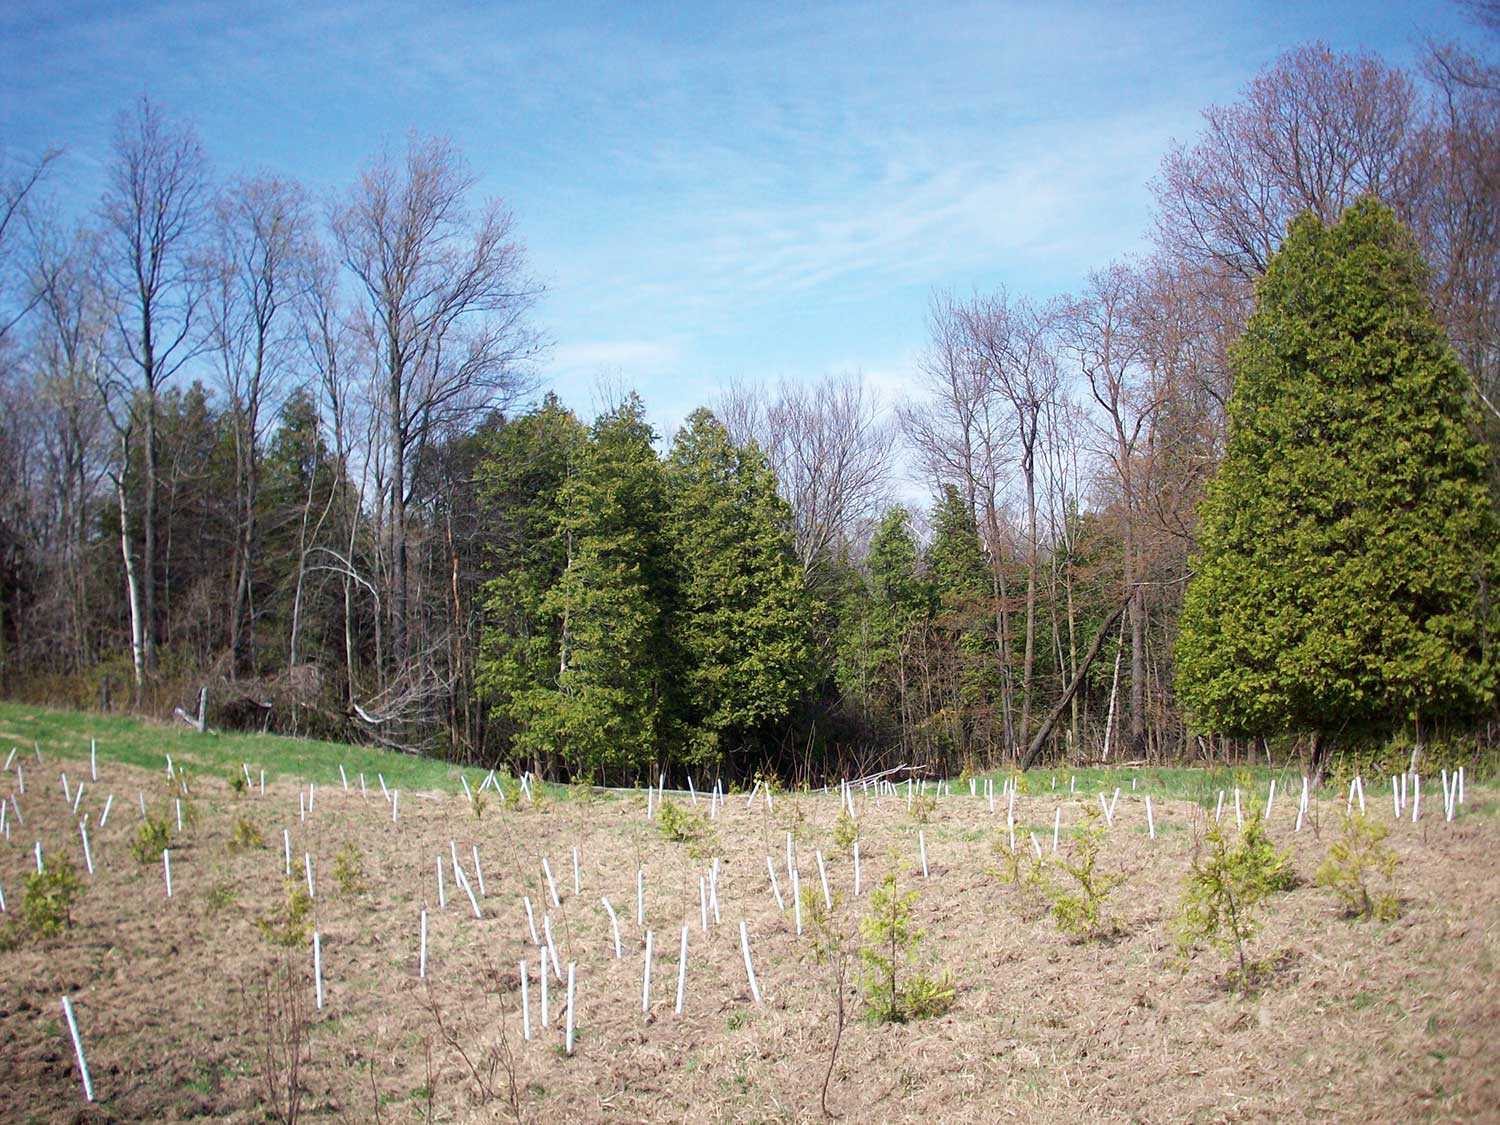 Planted area of lowland species expanding existing cover adjacent to the former pasture on the Blair property (Photo: John Stille).